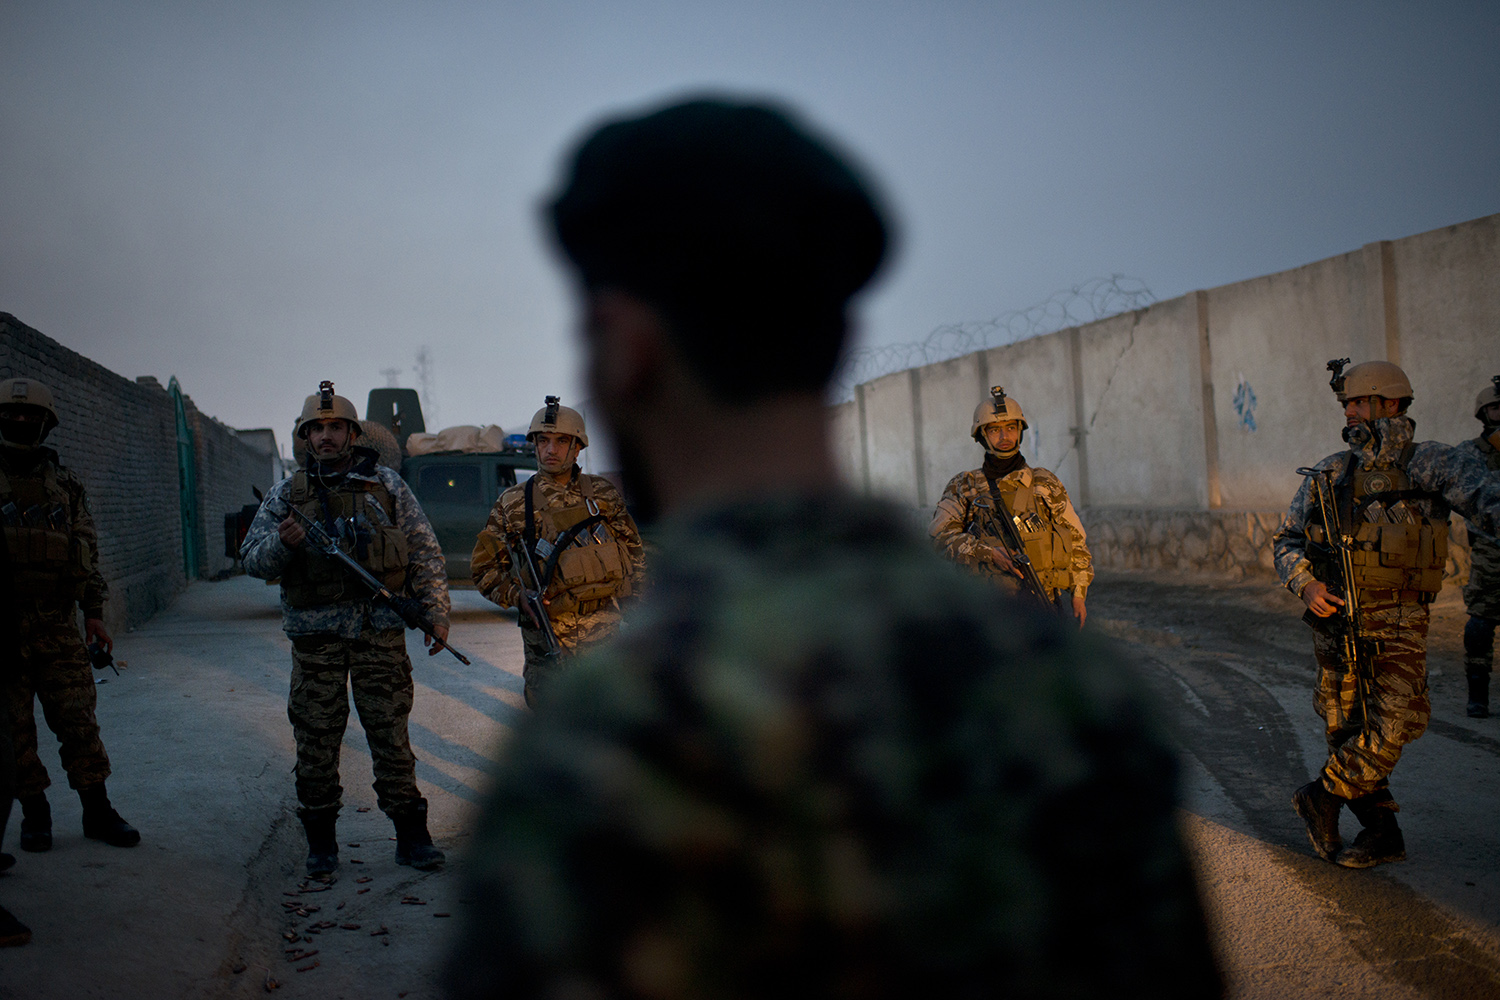 Afghan Security forces stand guard on the perimeter of an ongoing attack at the election headquarters in Kabul,  Afghanistan, March 29, 2014.  The Taliban has declared it will try to derail presidential elections, and there has been a surge in Taliban attacks in the days leading up to voting day in Afghanistan. (Credit: Lynsey Addario for Time Magazine)